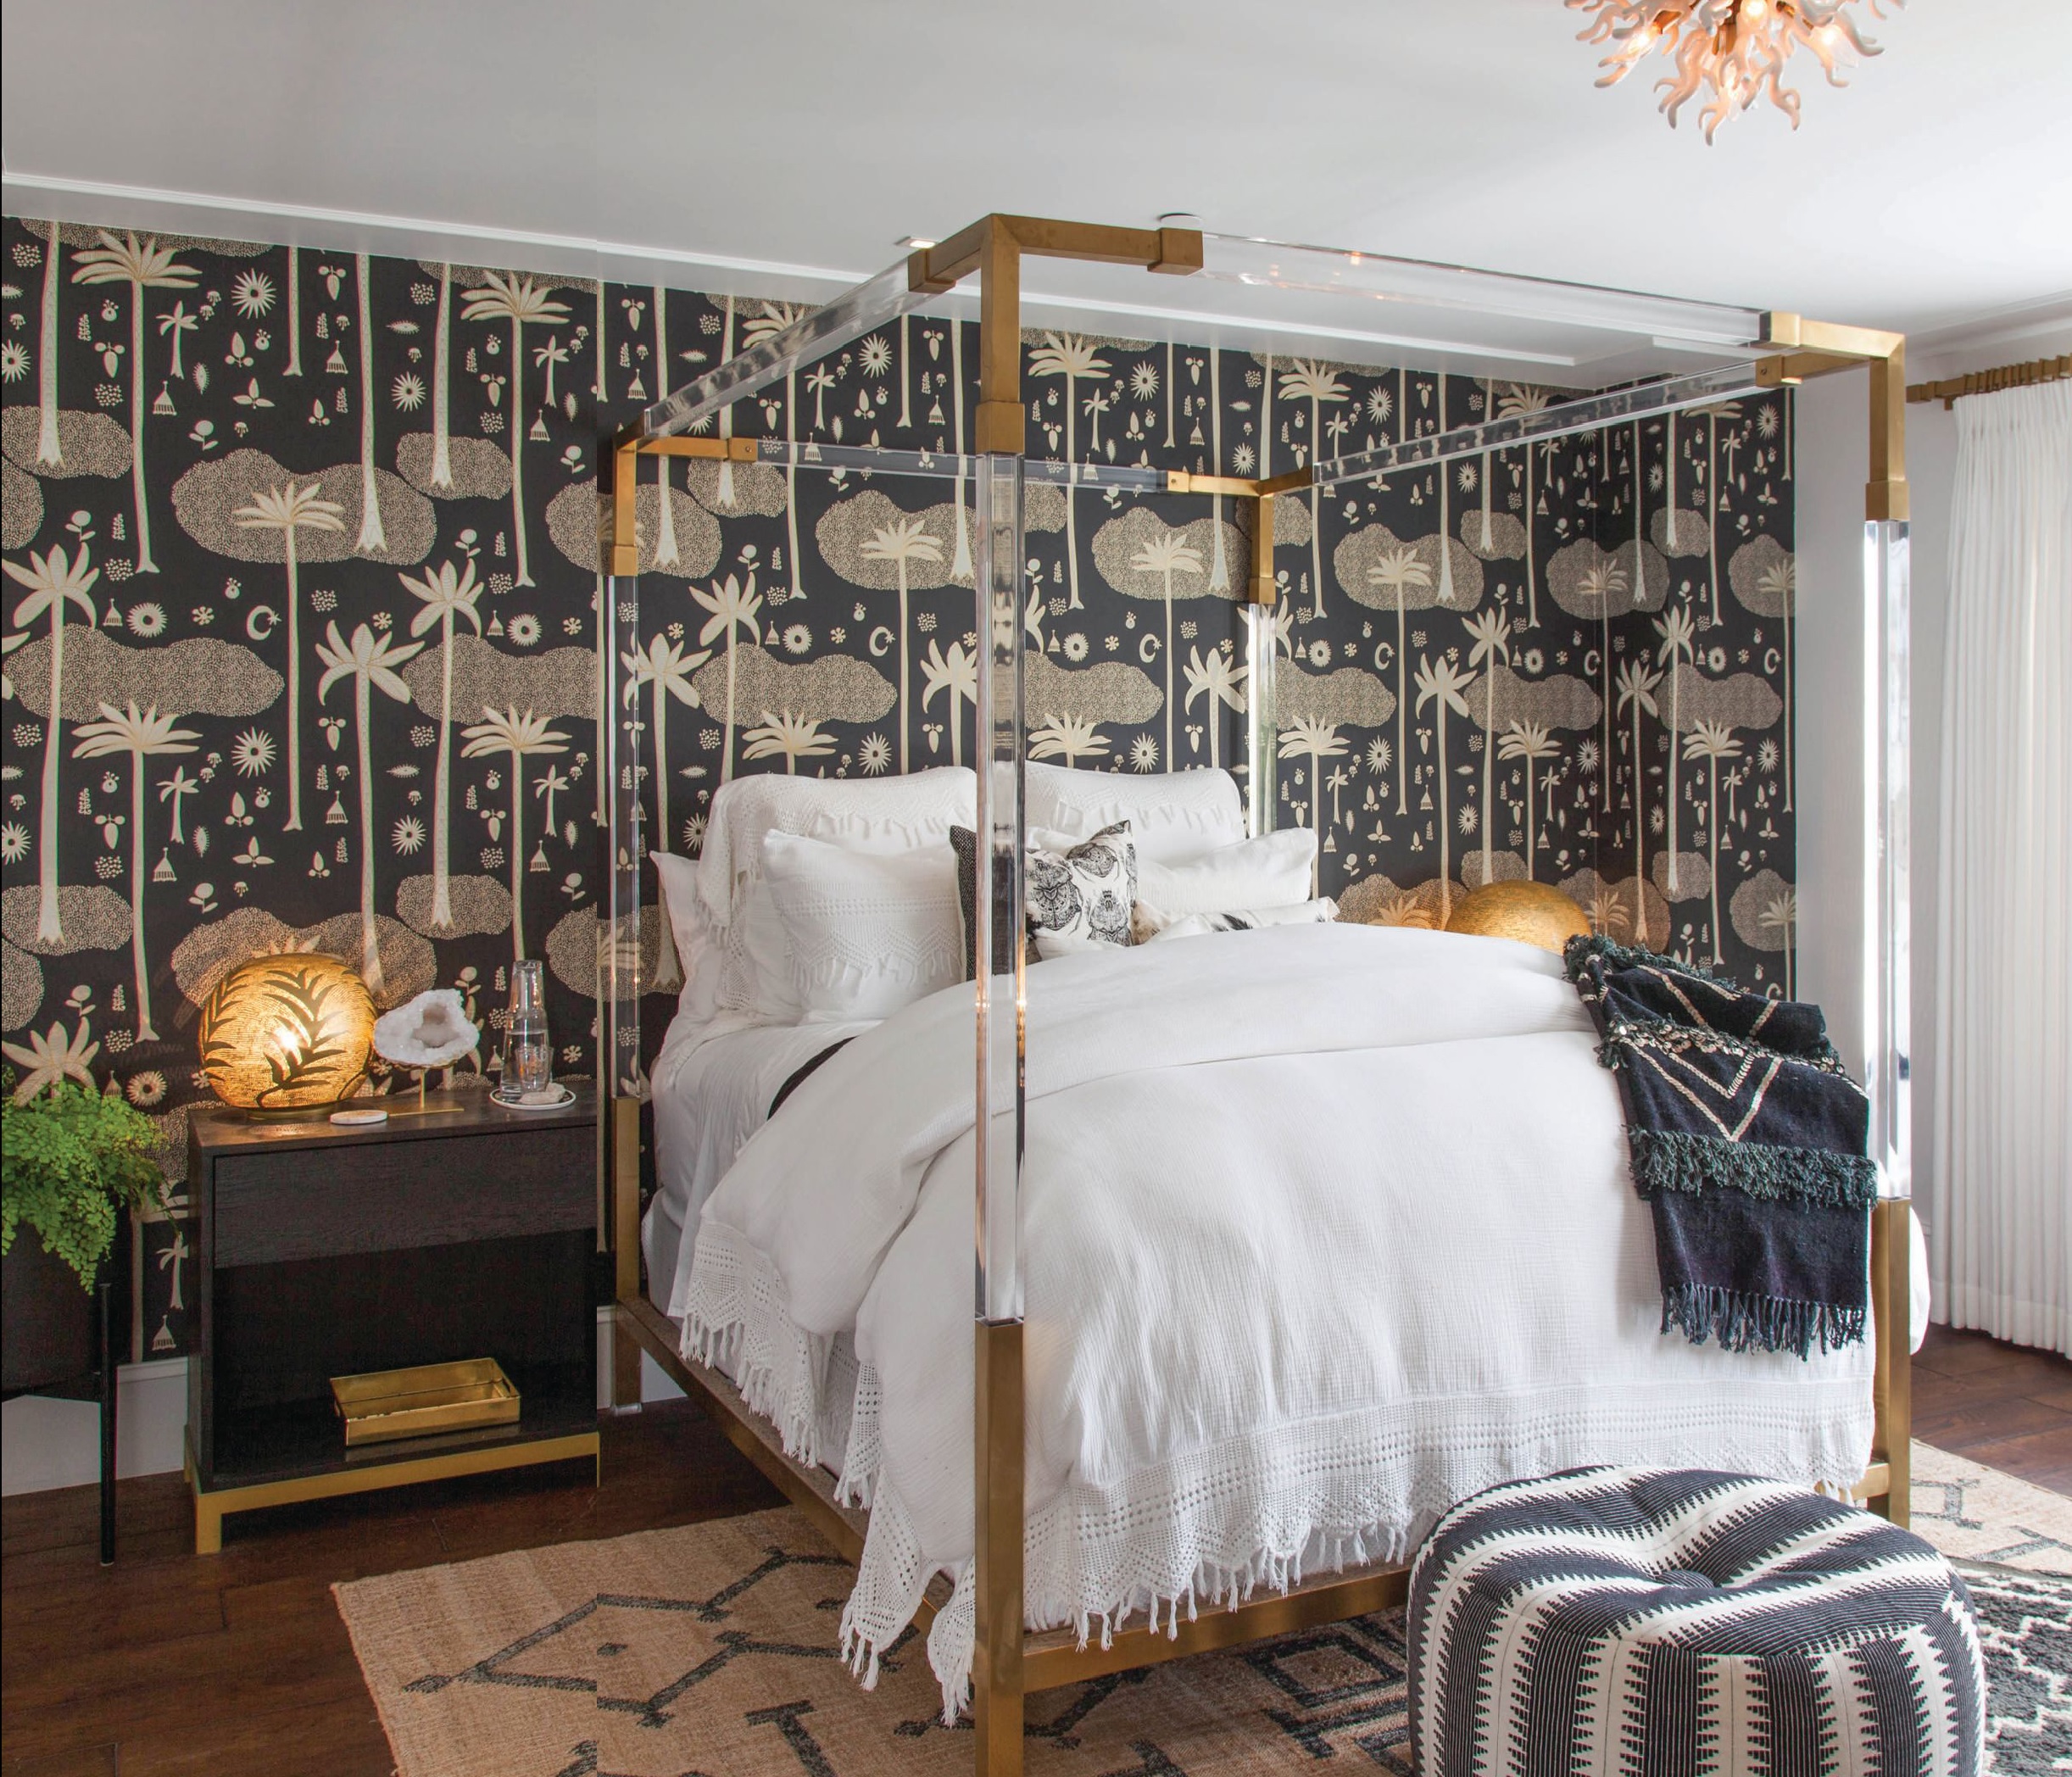  Jungalow wallpaper by Justina Blakeney x Hygge & West, a Lucite bed from Anthropologie and an overhead light fixture by Visual Comfort make a
dramatic statement.  PHOTO BY:  GAIL OWENS